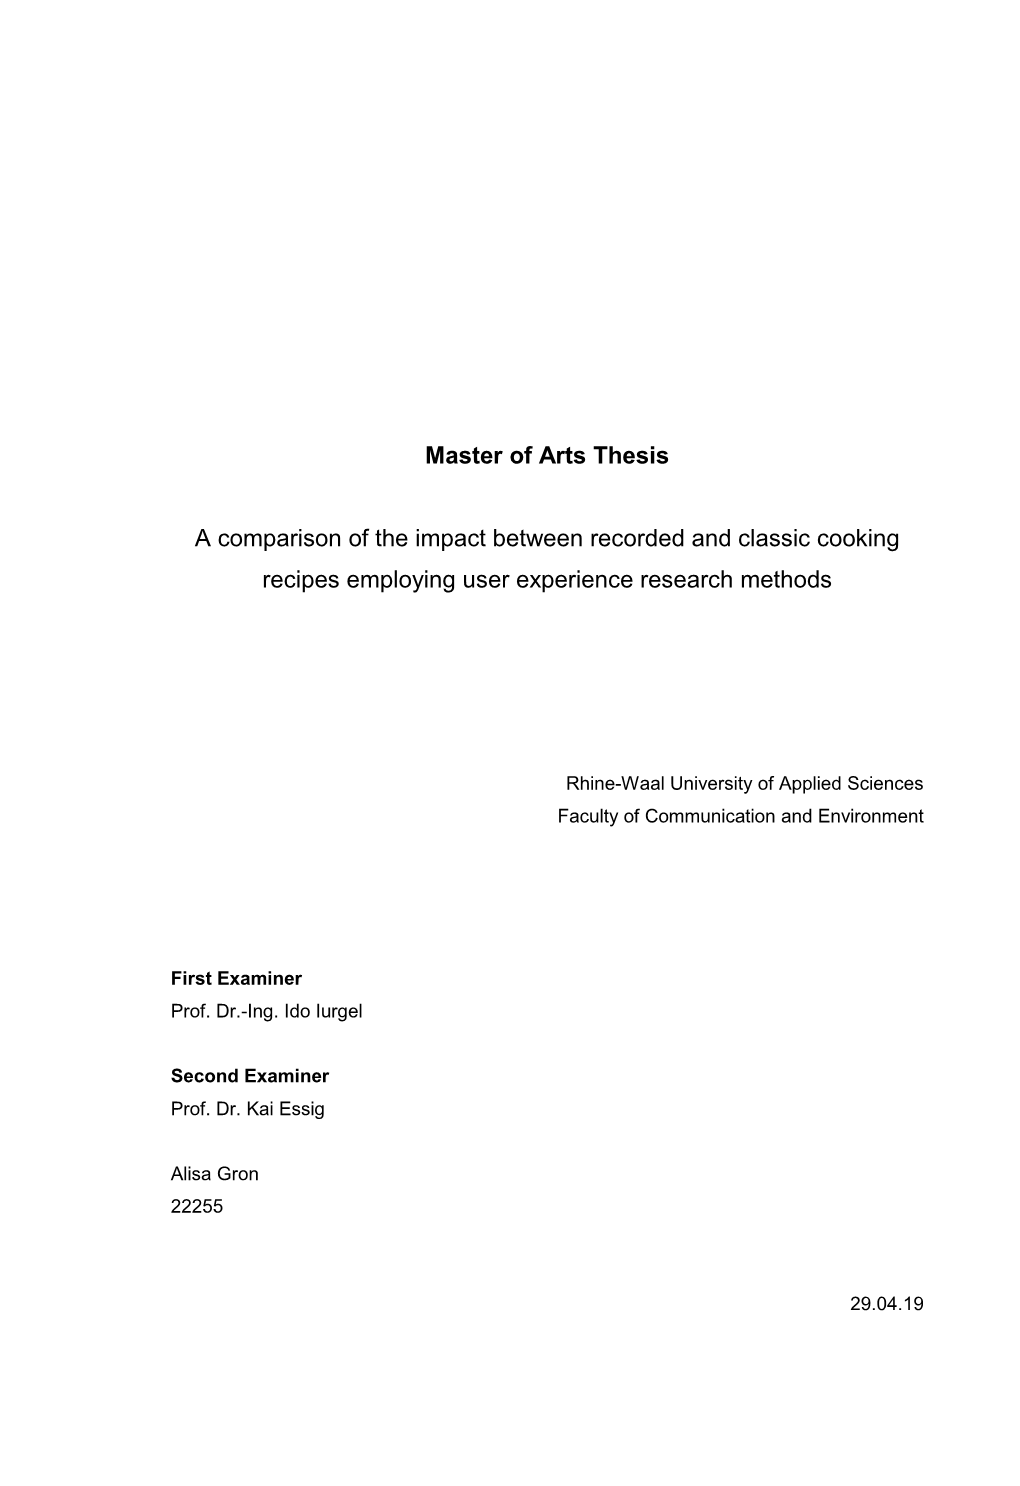 Master of Arts Thesis a Comparison of the Impact Between Recorded And